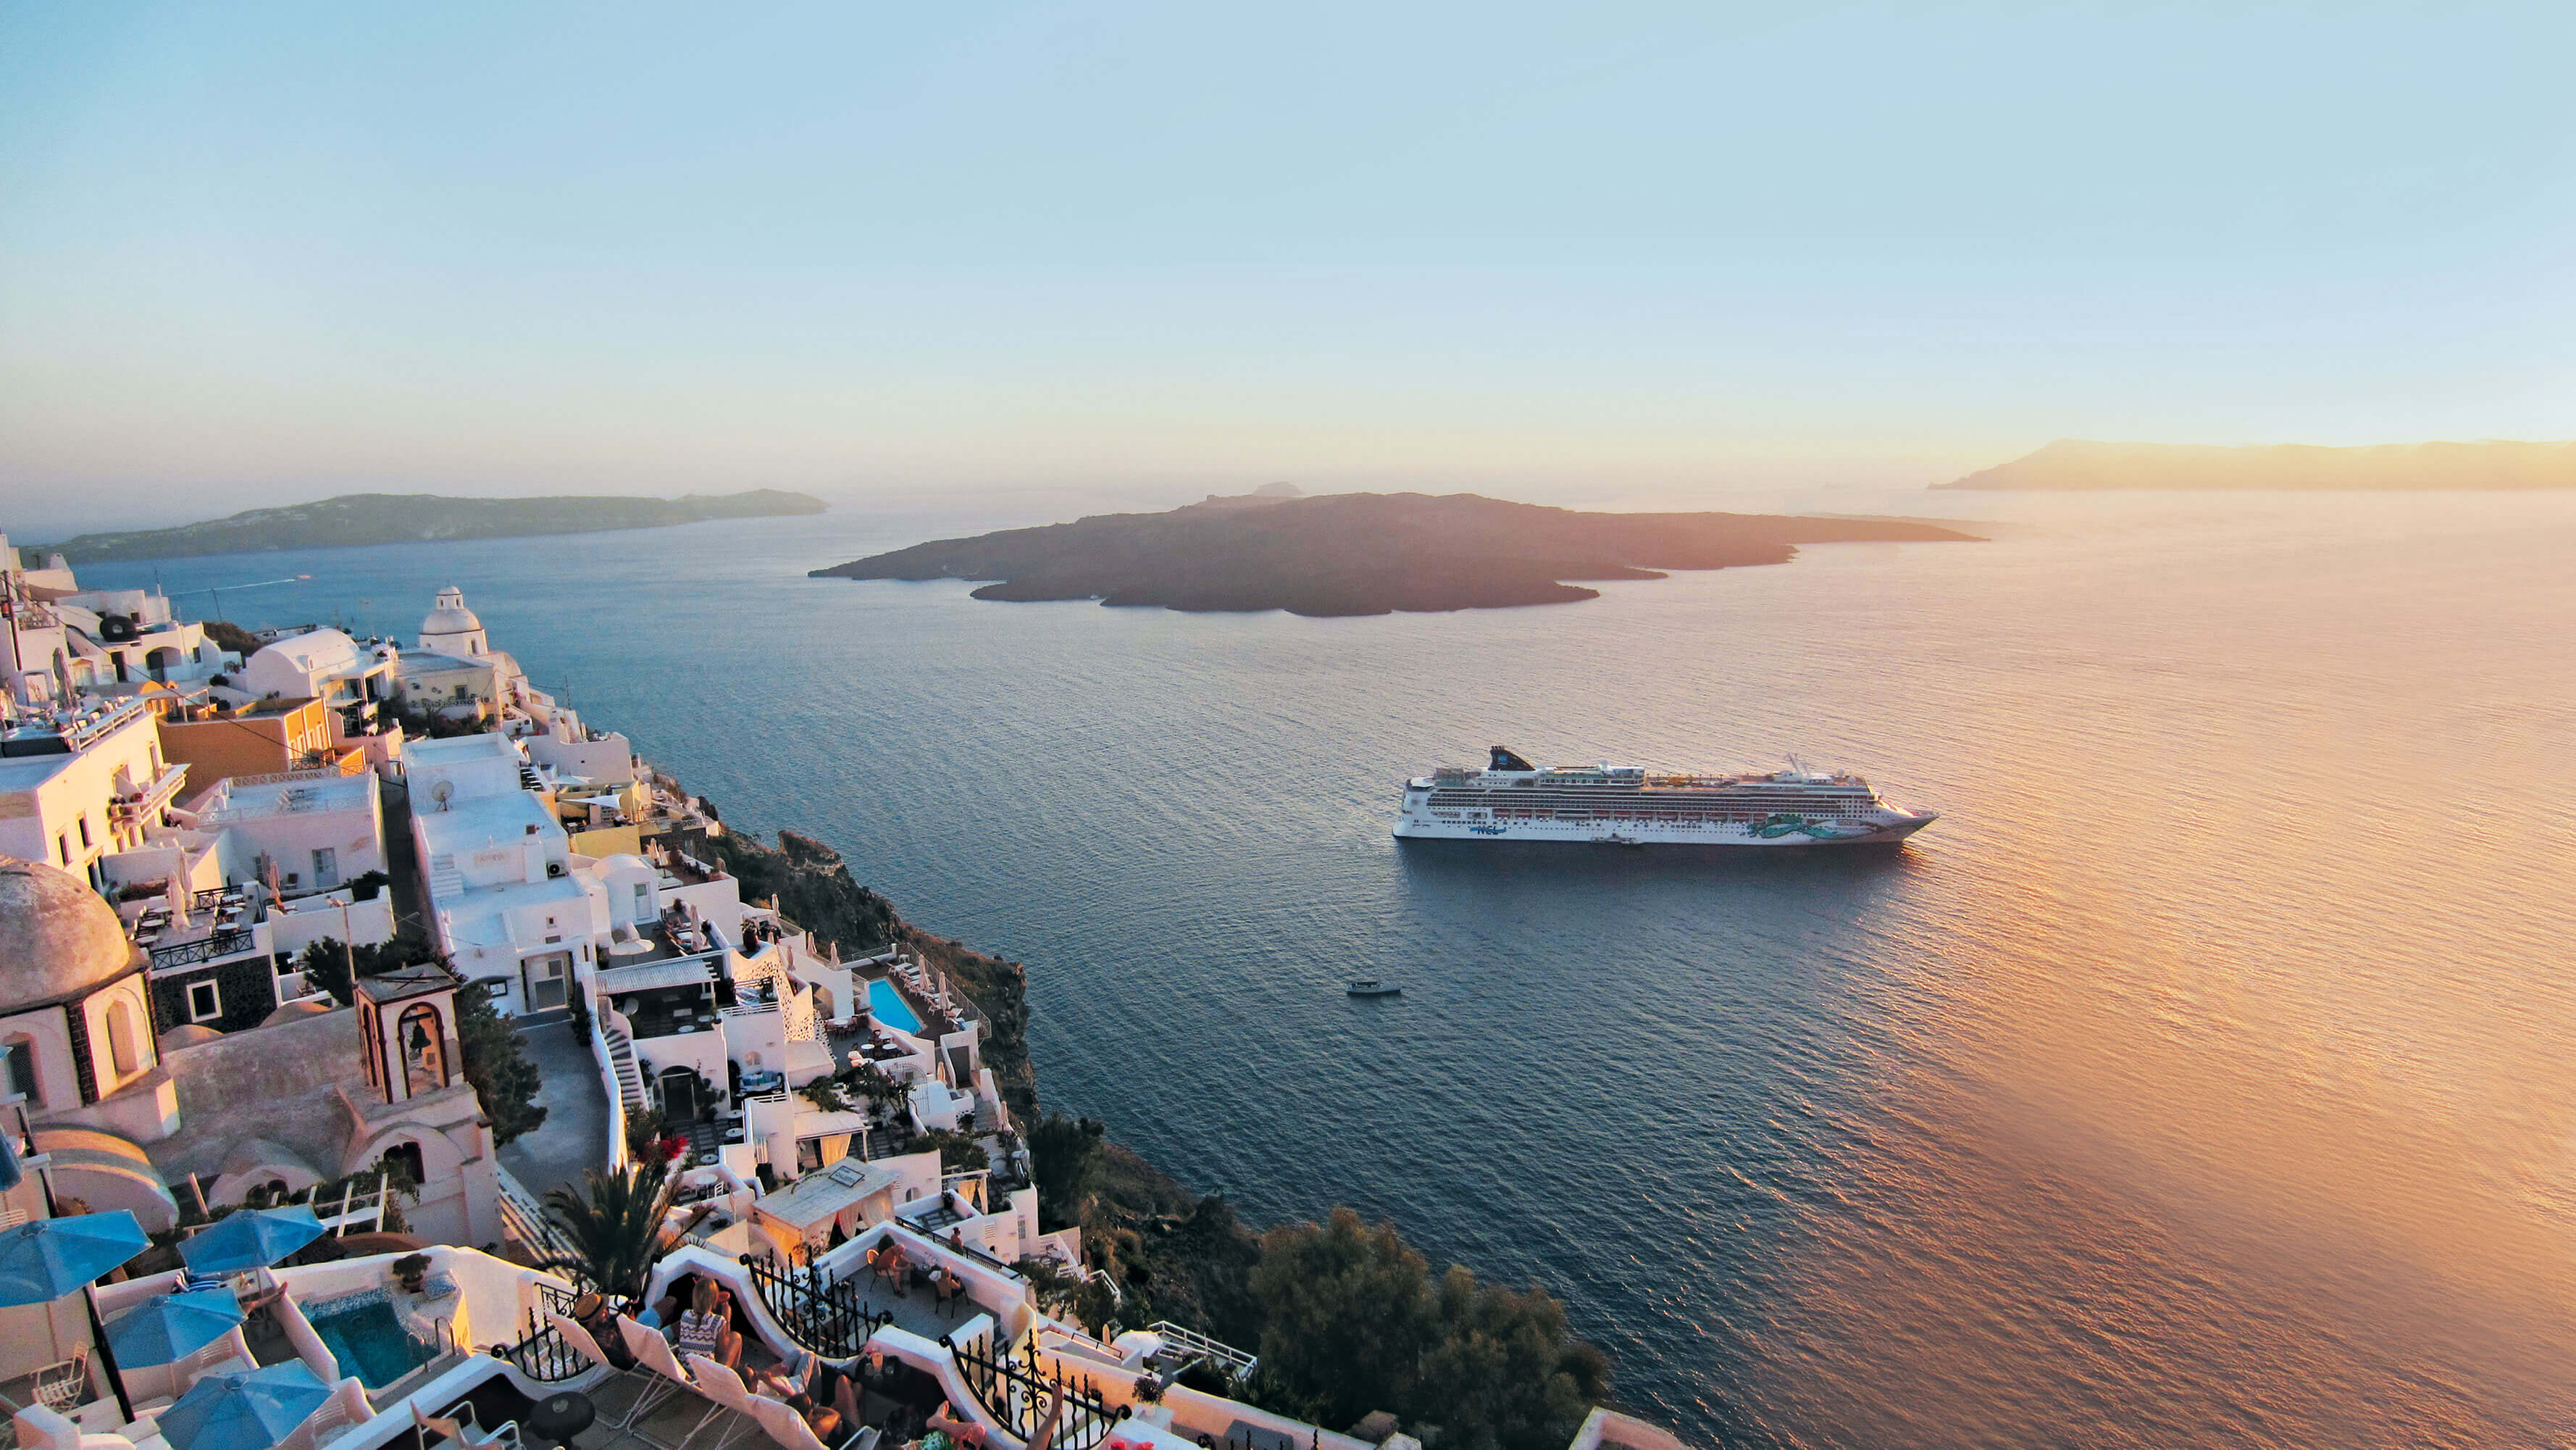 A cruise ship is seen anchored in a harbour, near the shore of a Mediterranean-looking village.